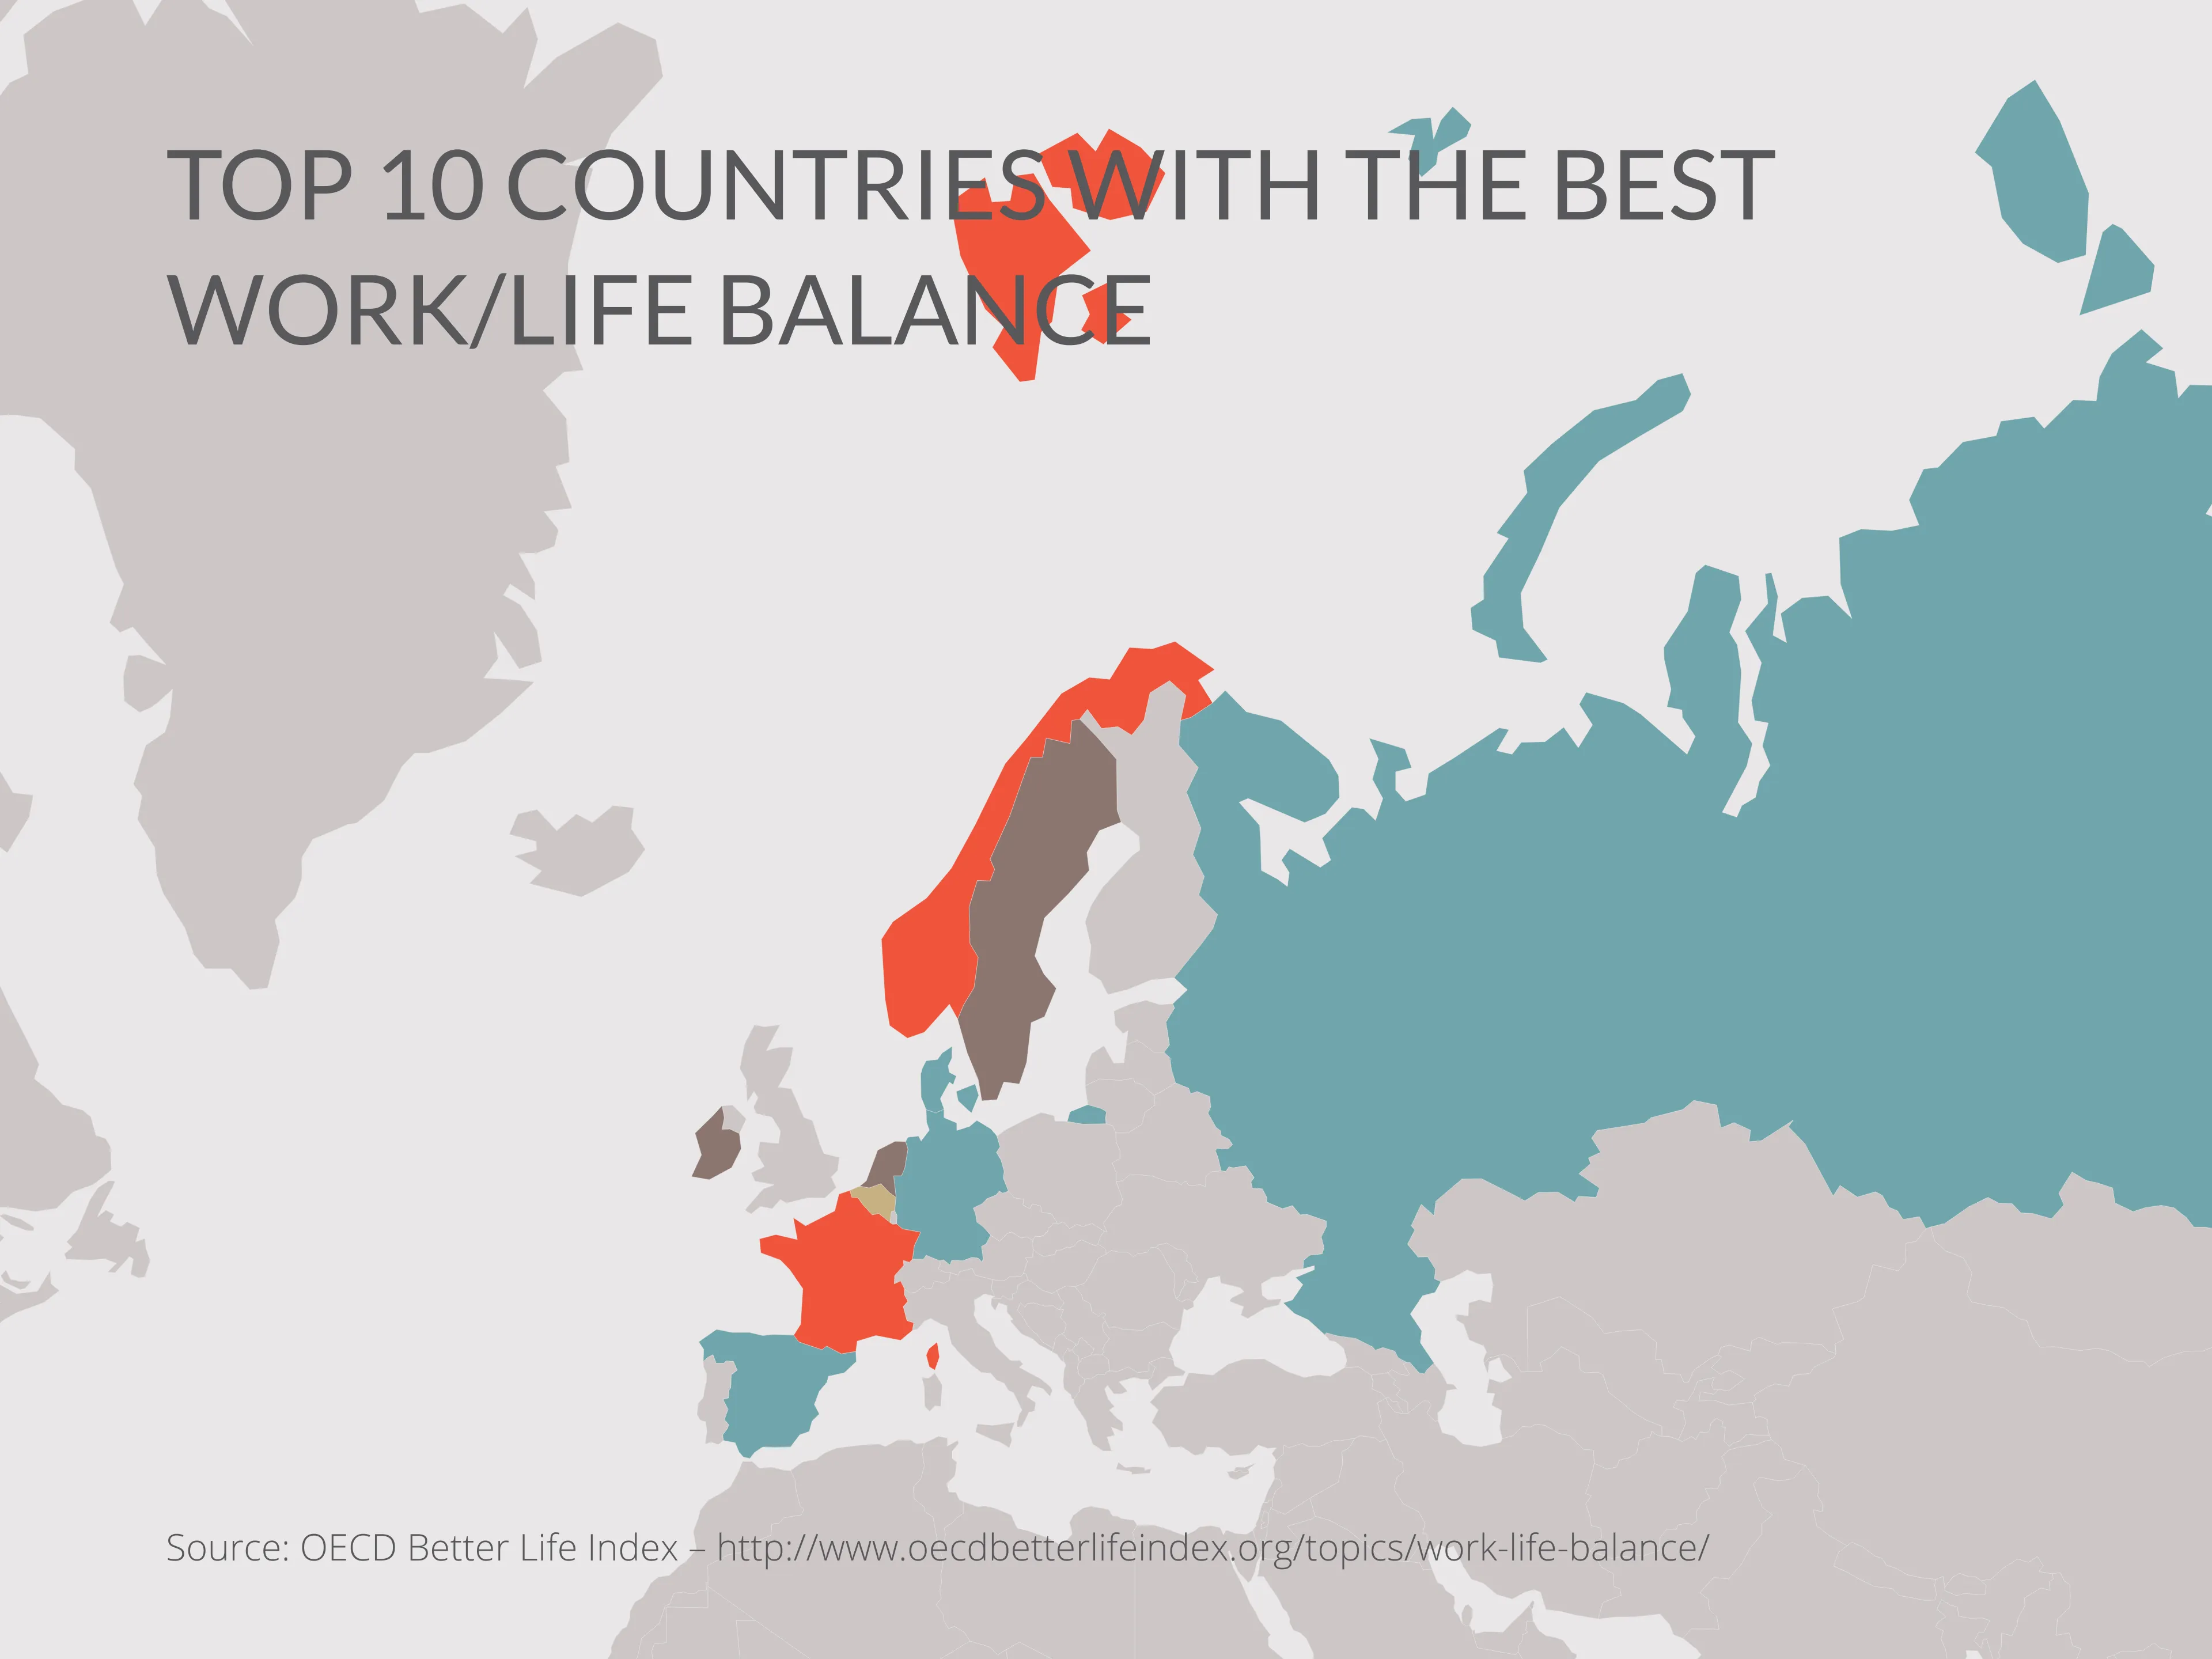 TOP 10 COUNTRIES WITH THE BEST WORK/LIFE BALANCE